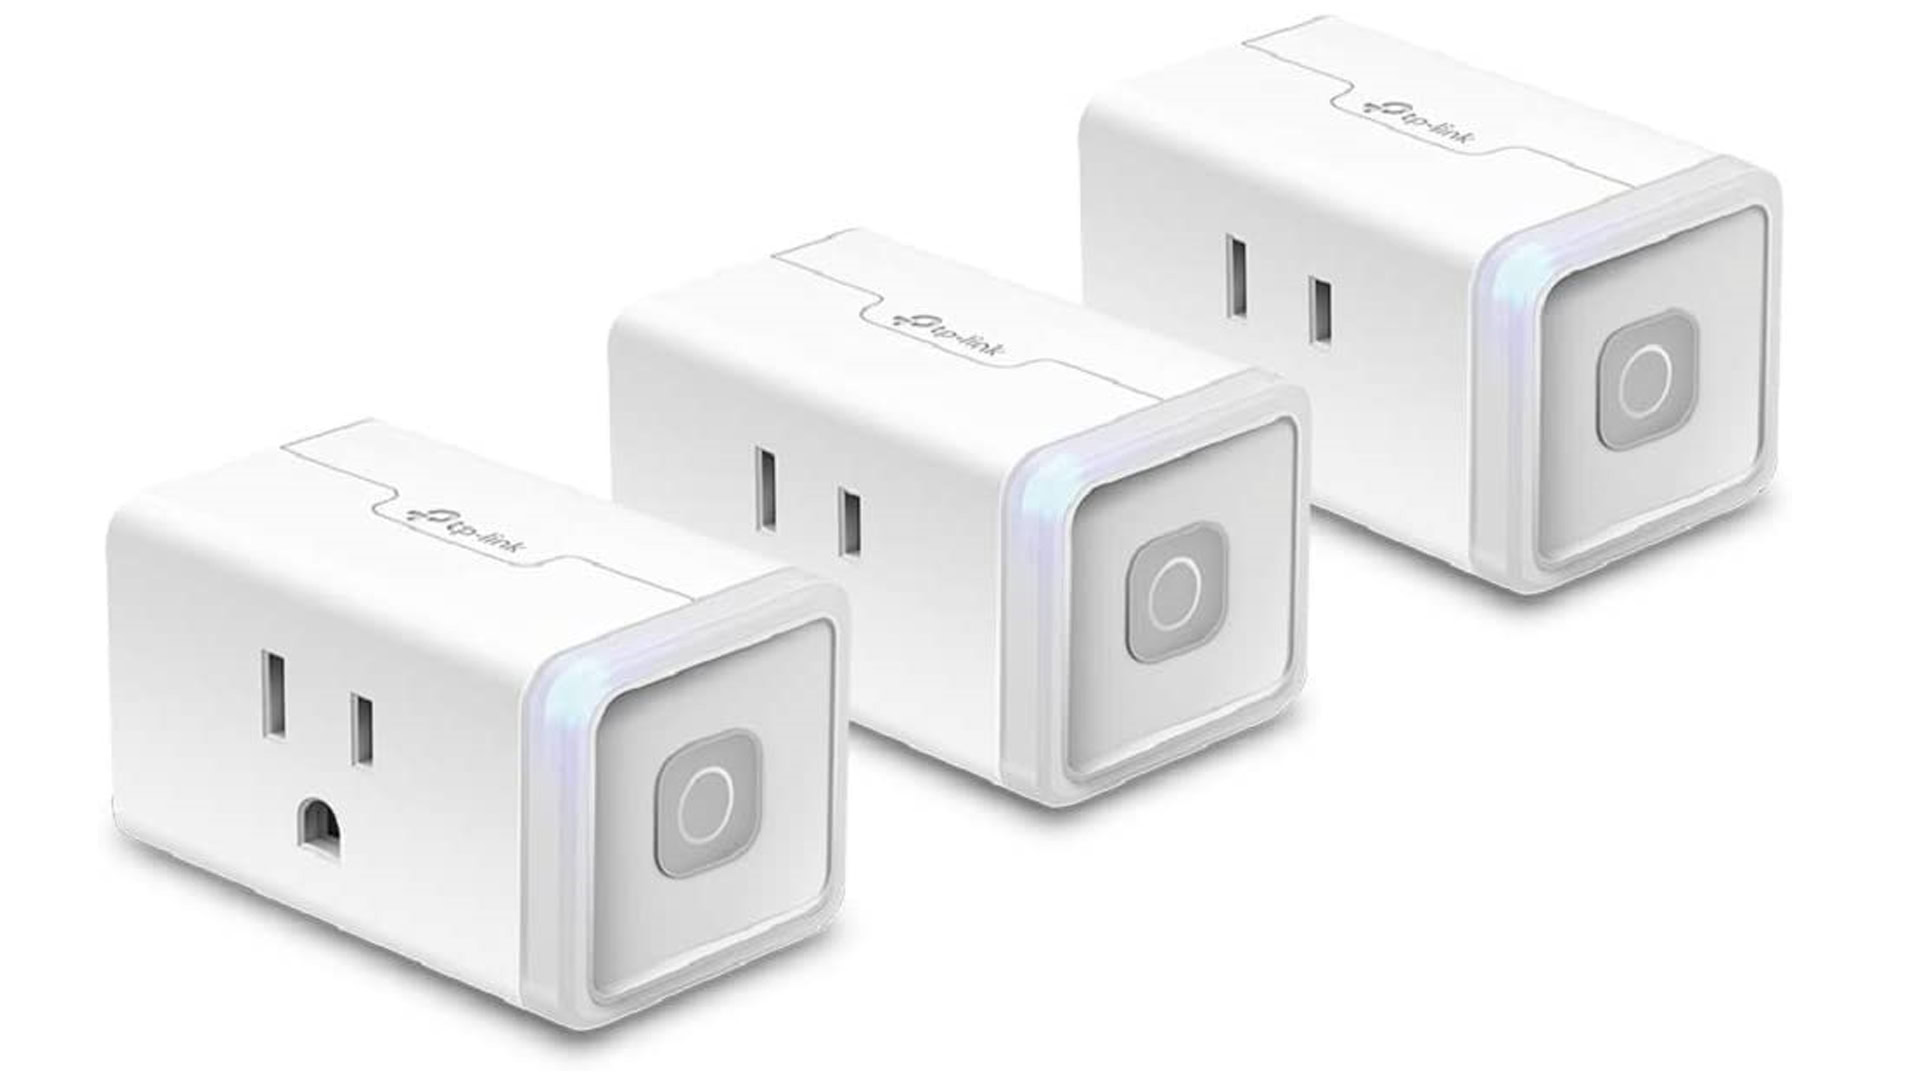 Govee Smart Plug review: Inexpensive but still underwhelming